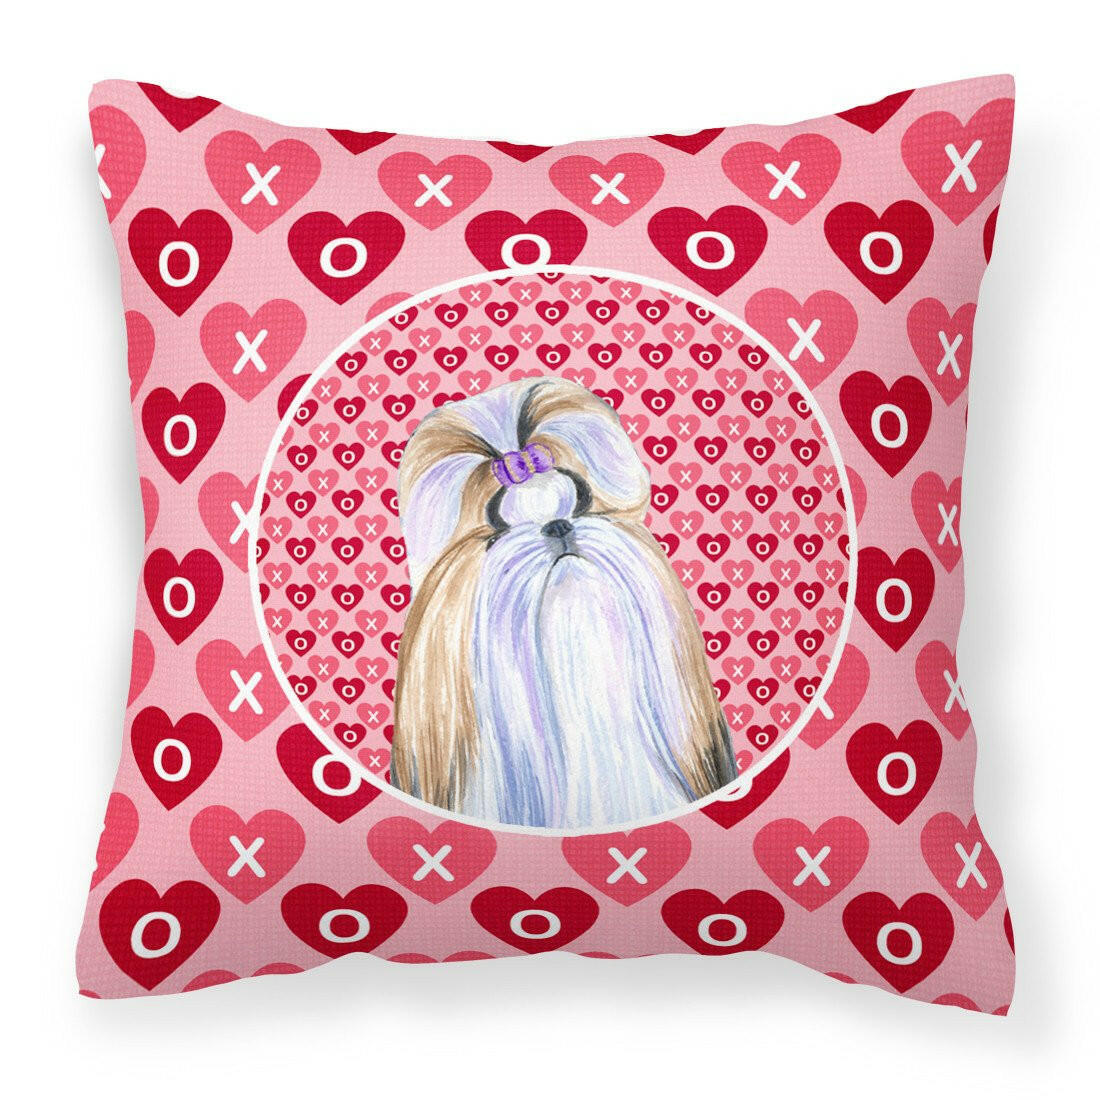 Shih Tzu Hearts Love and Valentine's Day Portrait Fabric Decorative Pillow SS4465PW1414 by Caroline's Treasures